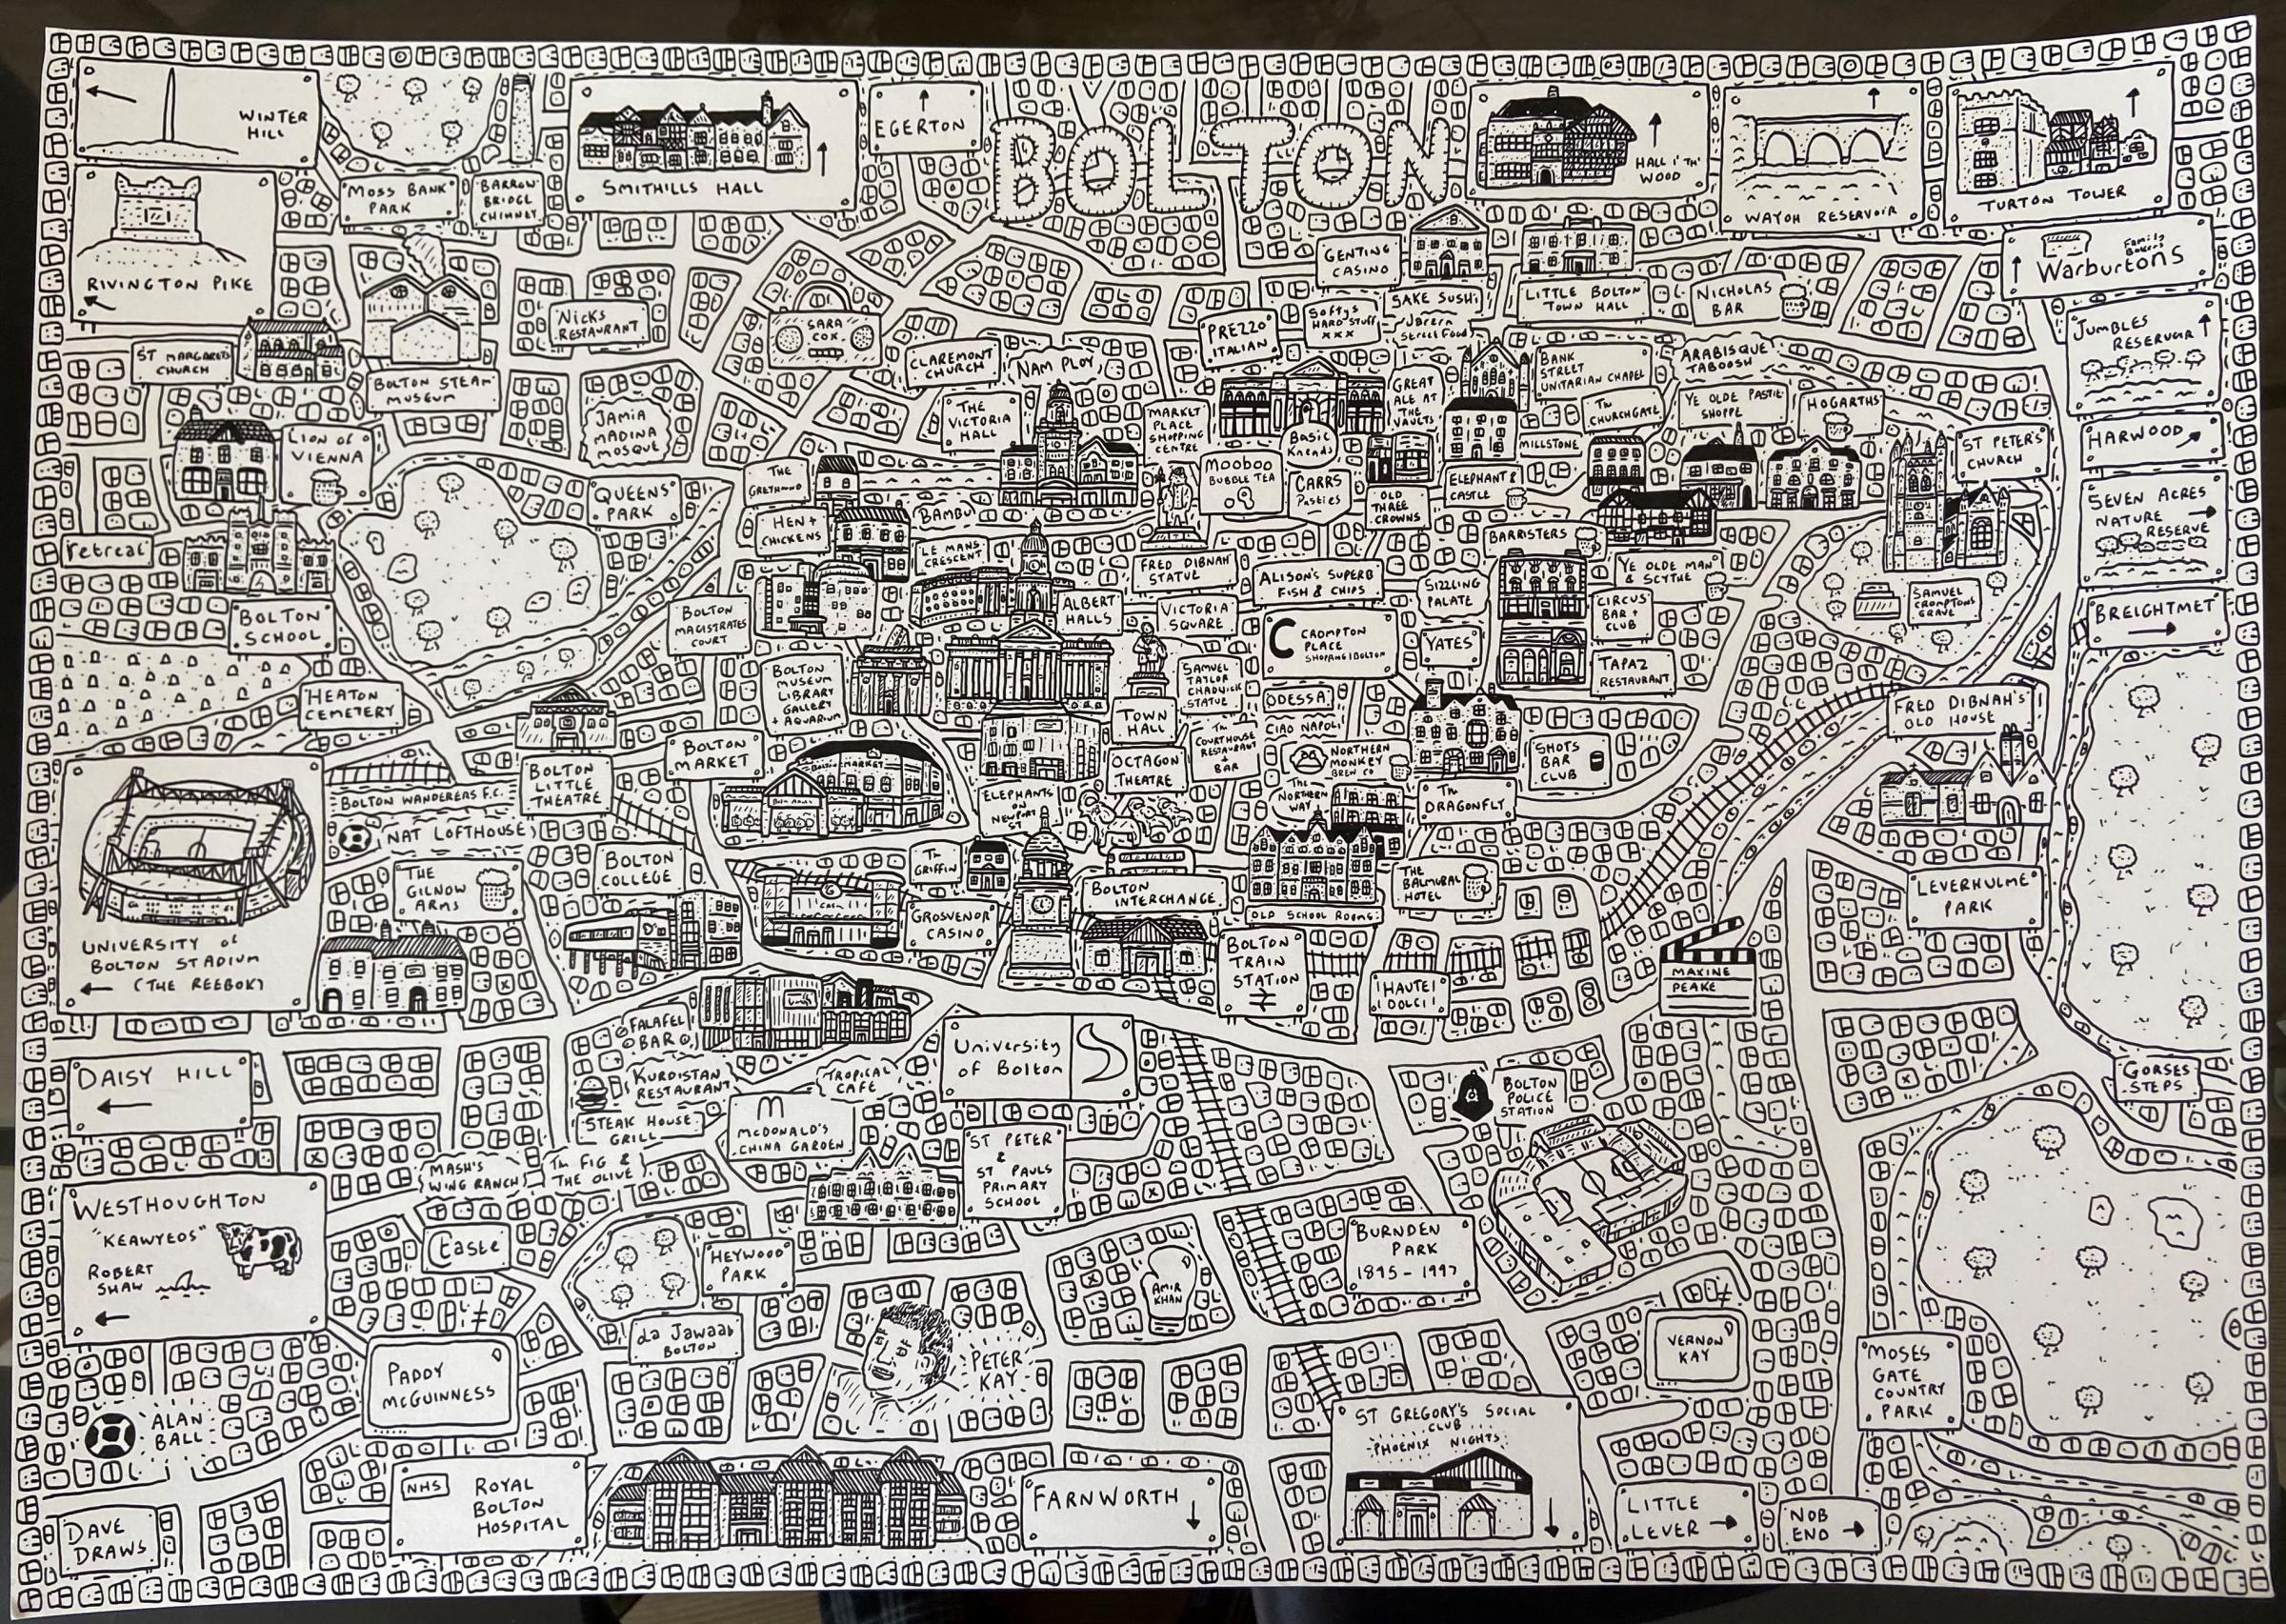 Bolton Doodle Map by artist Dave Draws